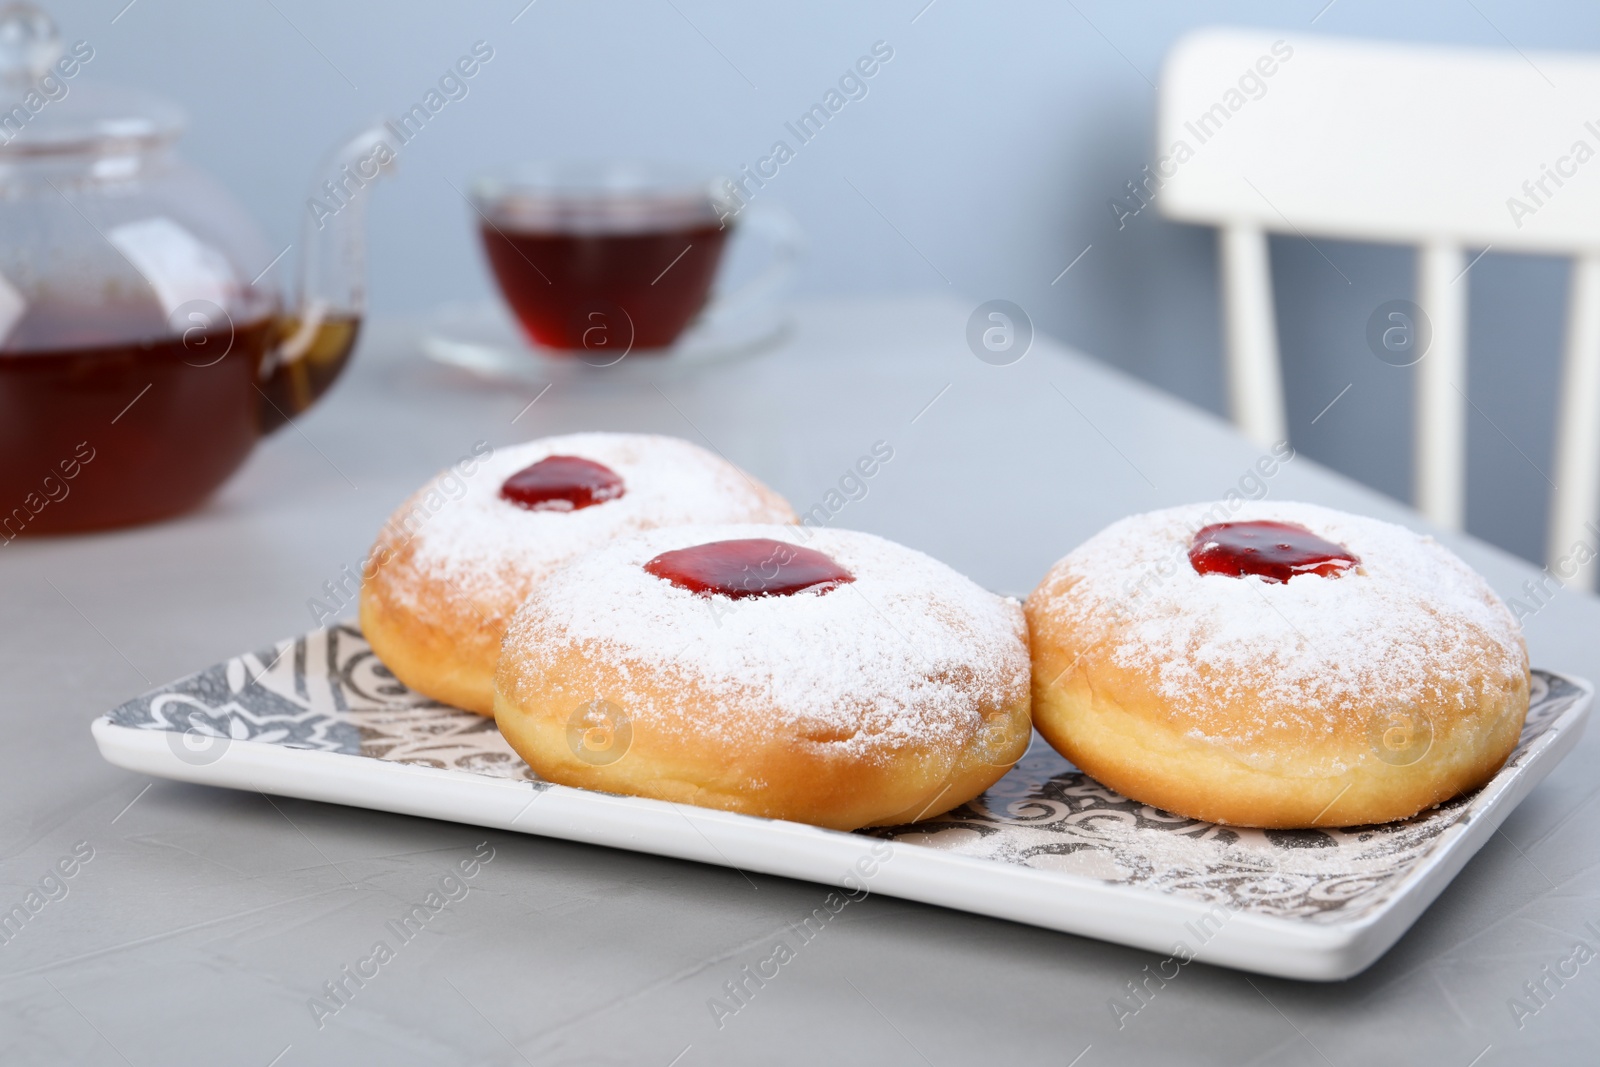 Photo of Hanukkah doughnuts with jelly and sugar powder served on grey table